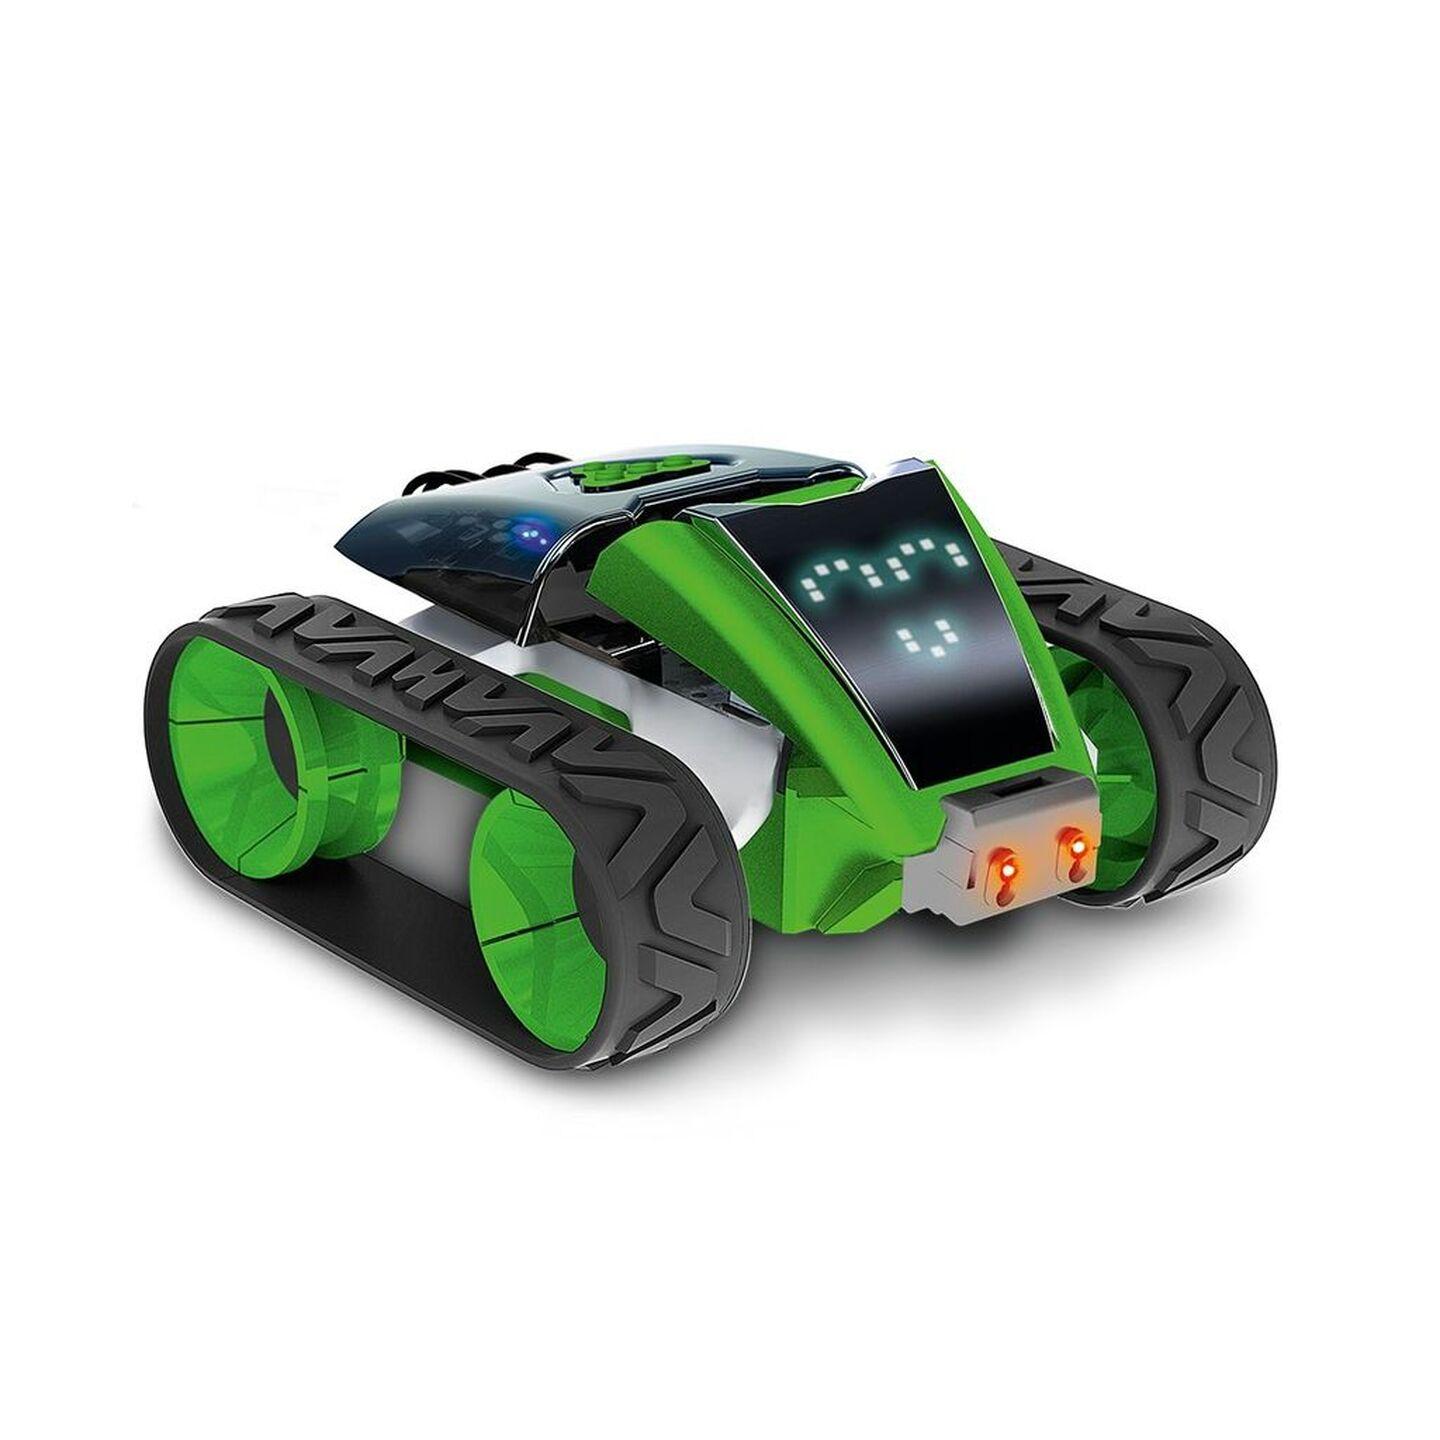 Mazzy Xtreme Bots Kit with Bluetooth Technology